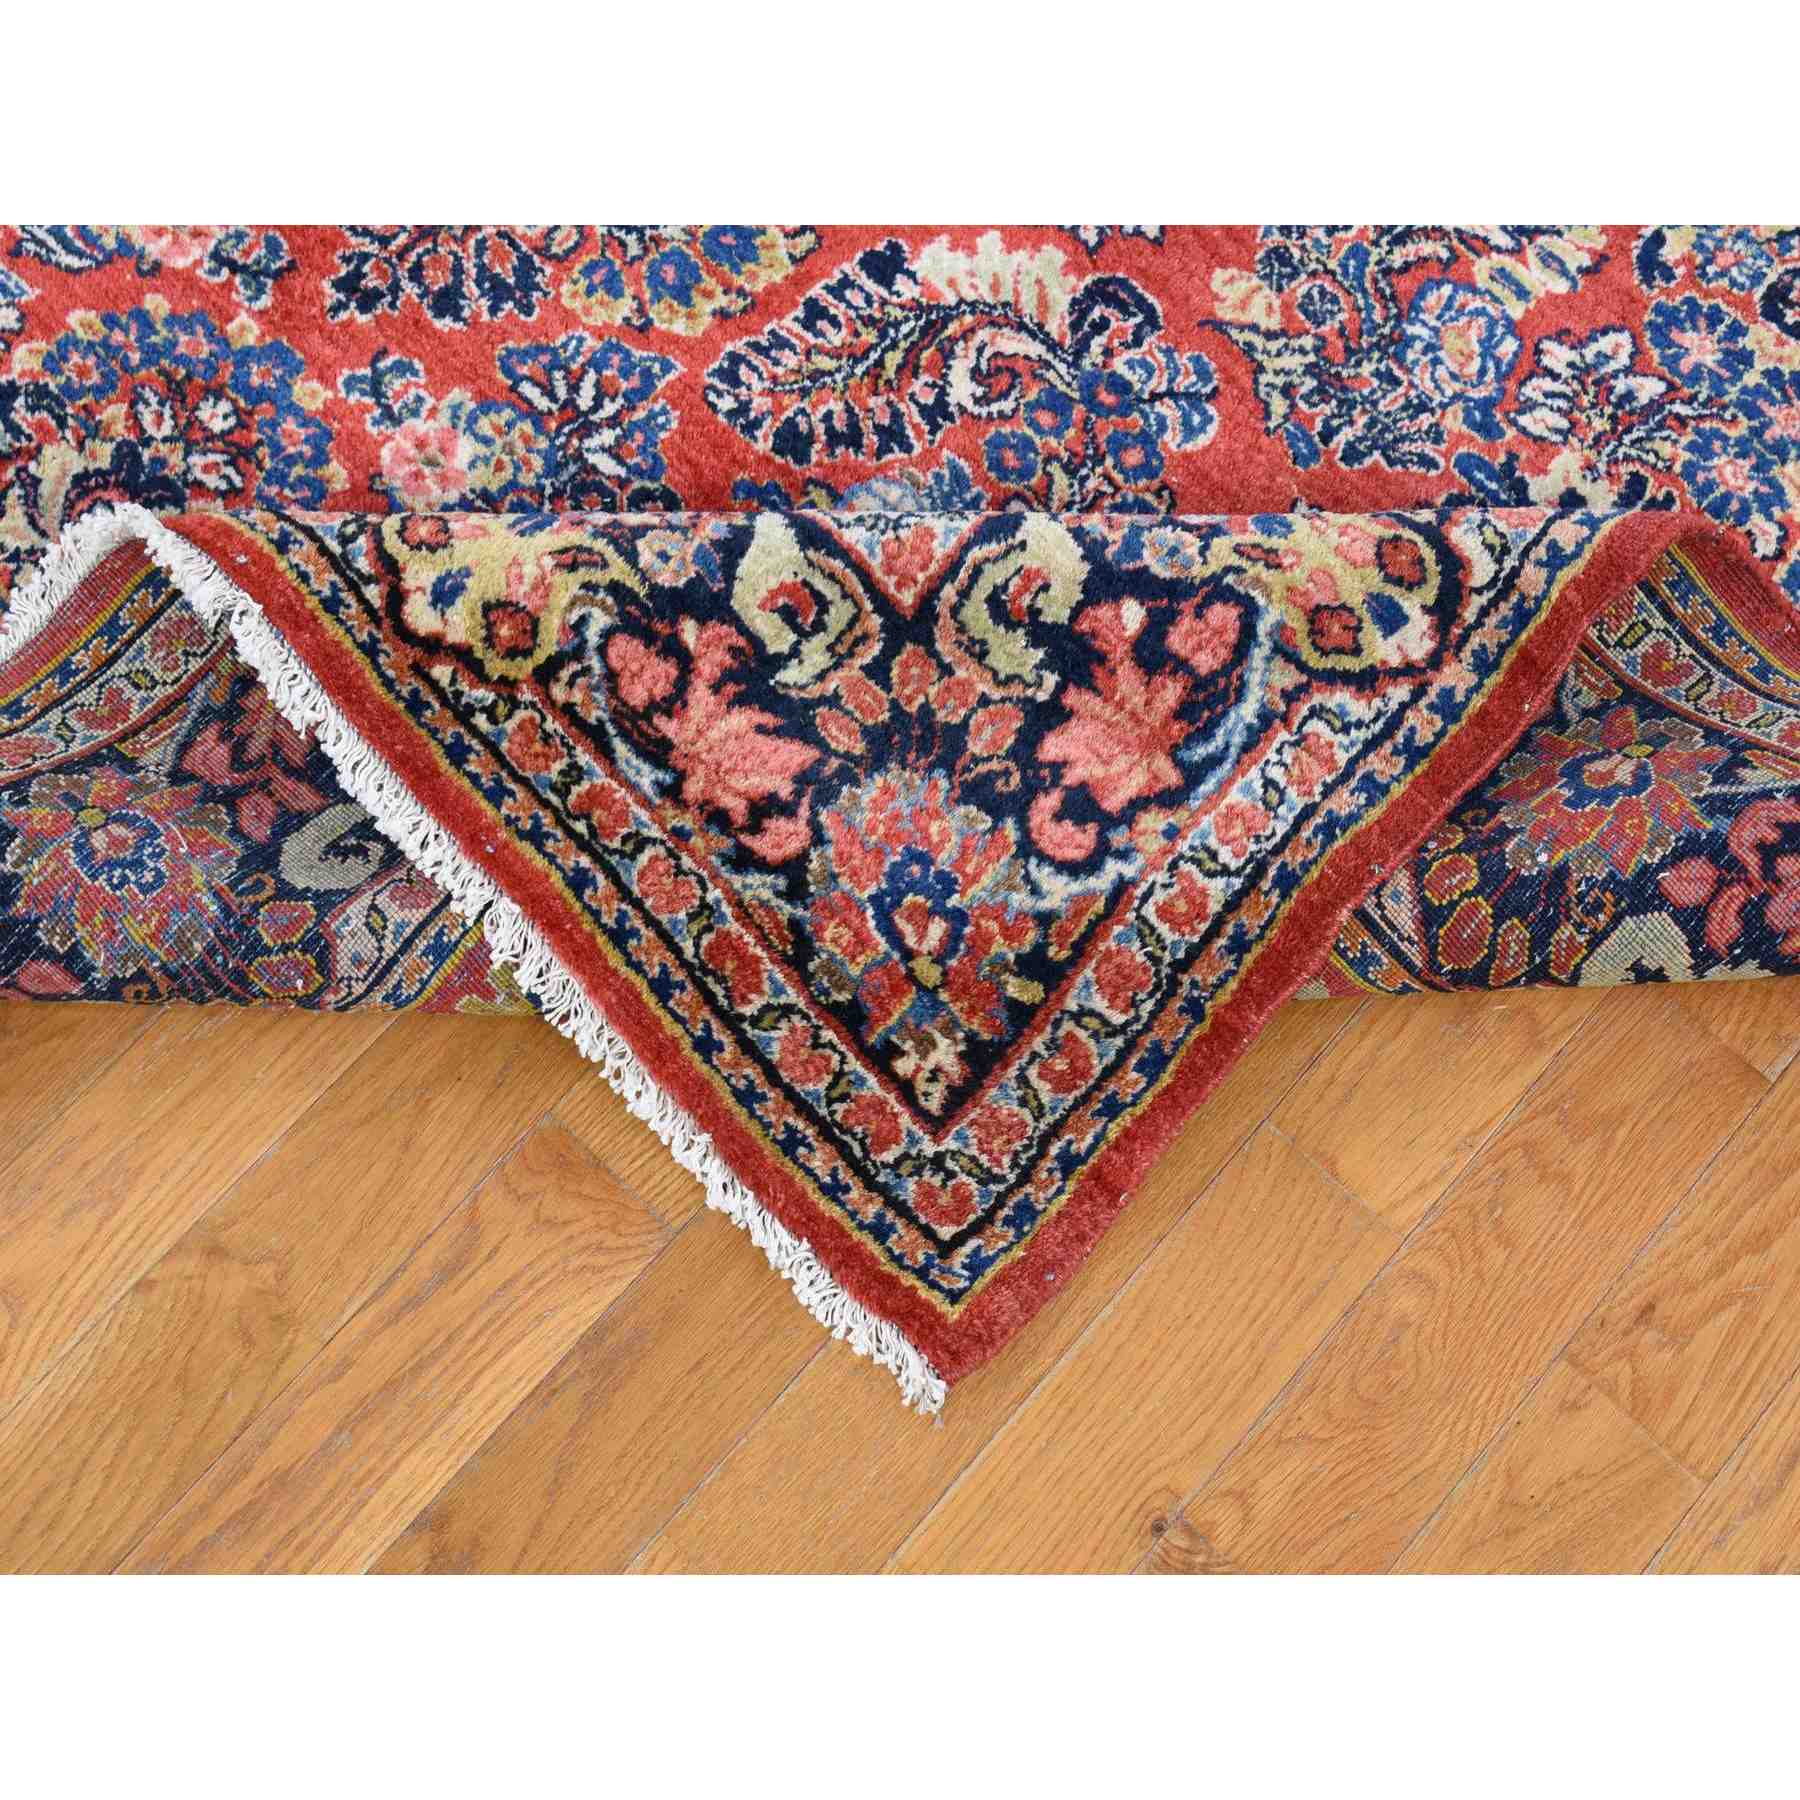 Antique-Hand-Knotted-Rug-400005